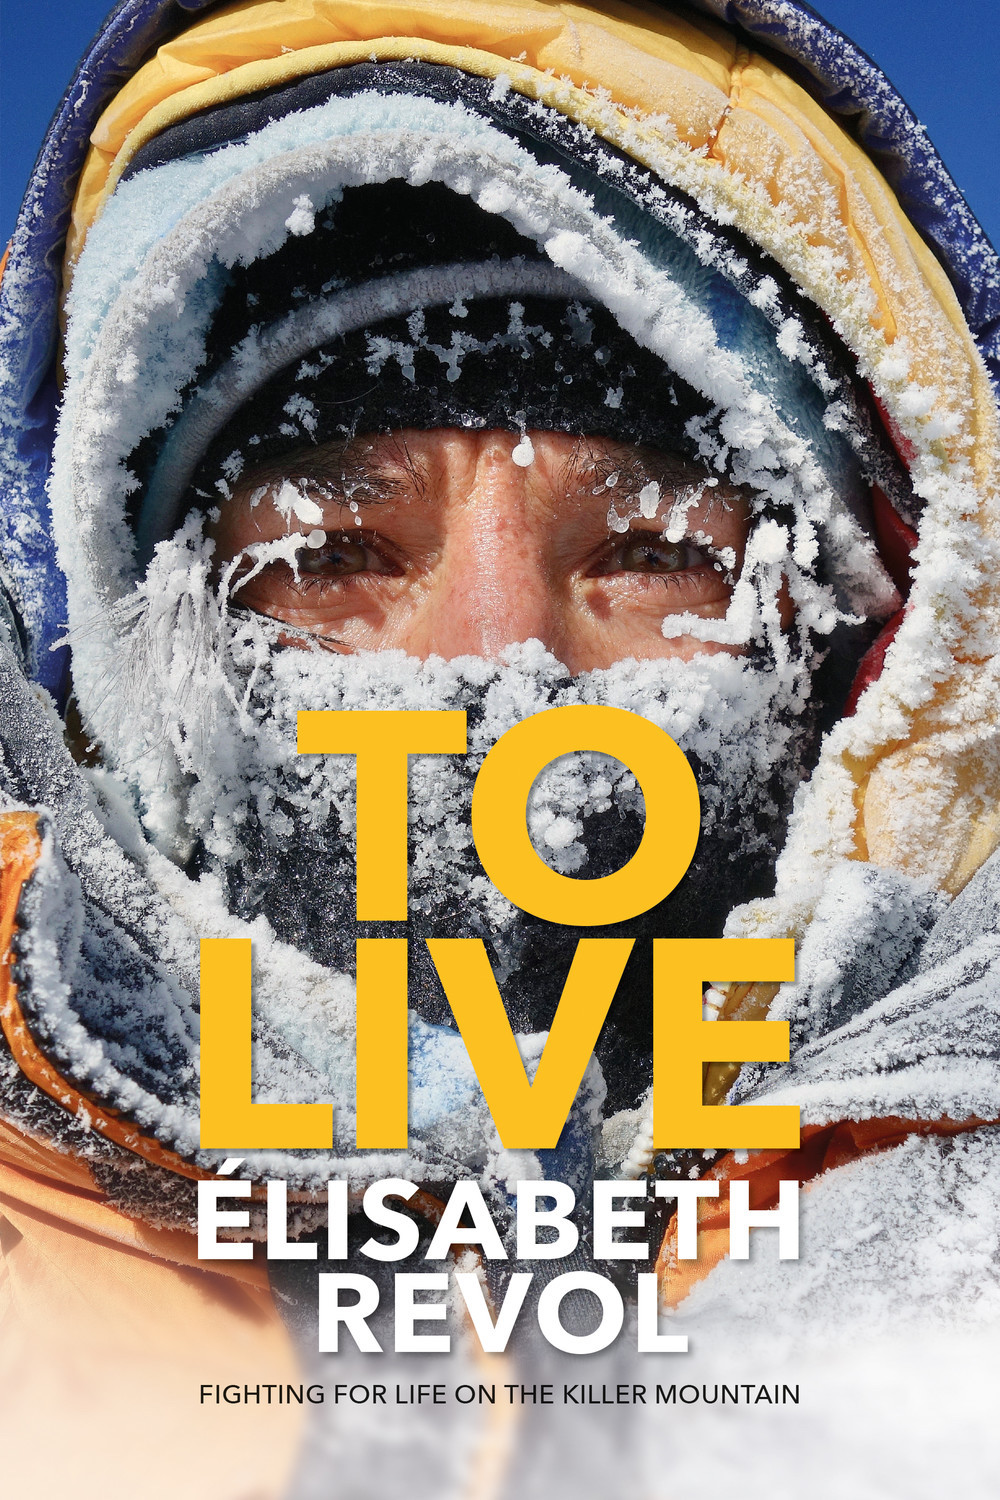 To Live: Fighting for Life on the Killer Mountain by Elisabeth Revol. Translated by Natalie Berry. Vertebrate Publishing, 2020. 154 pages. Hard cover, #24 (GBP). [Image] Courtesy Vertebrate Publishing